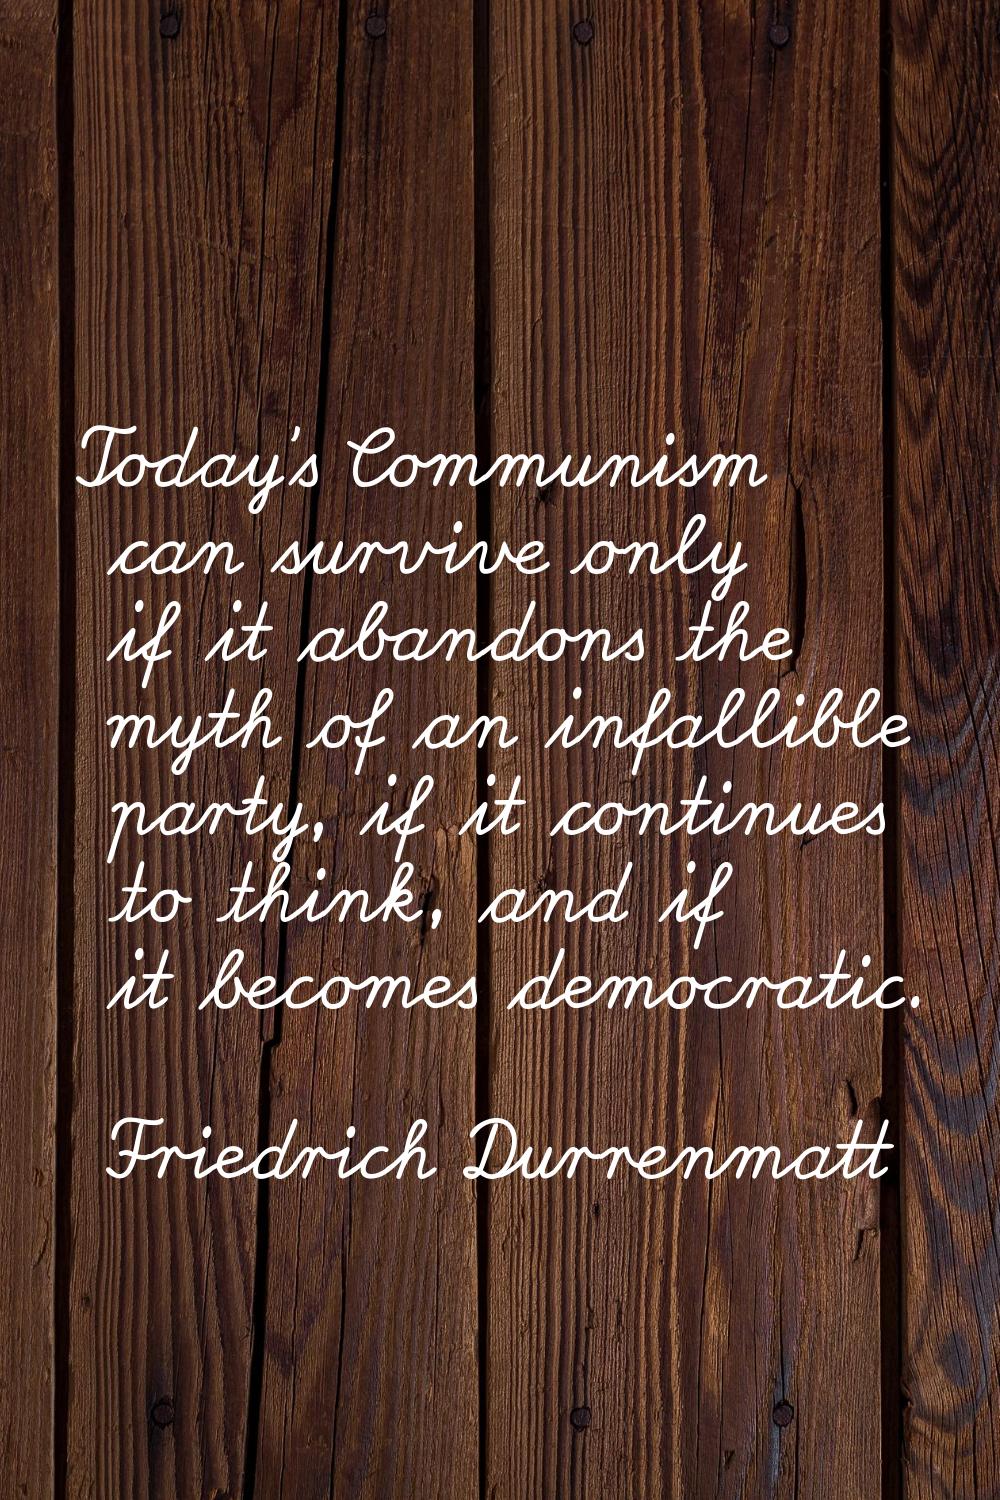 Today's Communism can survive only if it abandons the myth of an infallible party, if it continues 